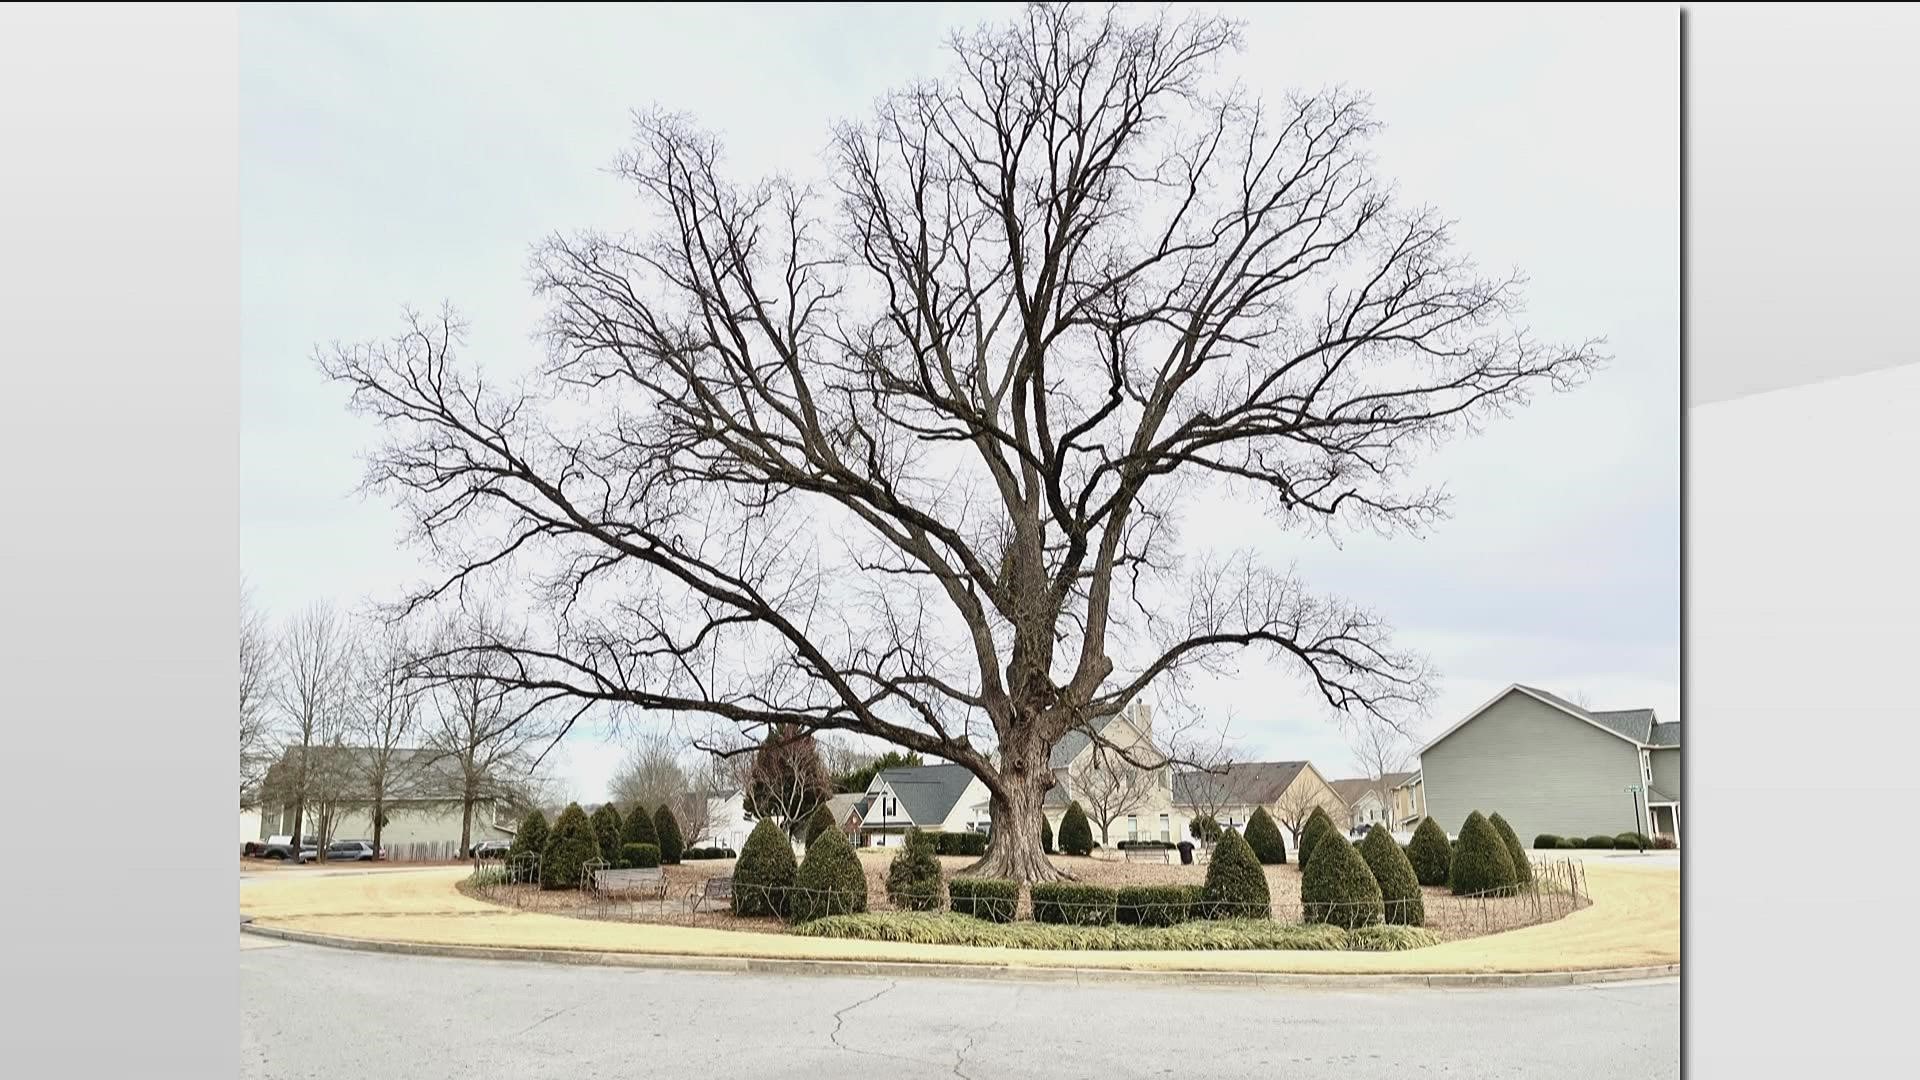 The 300-year-old tree will be removed after being considered a safety hazard to the community.